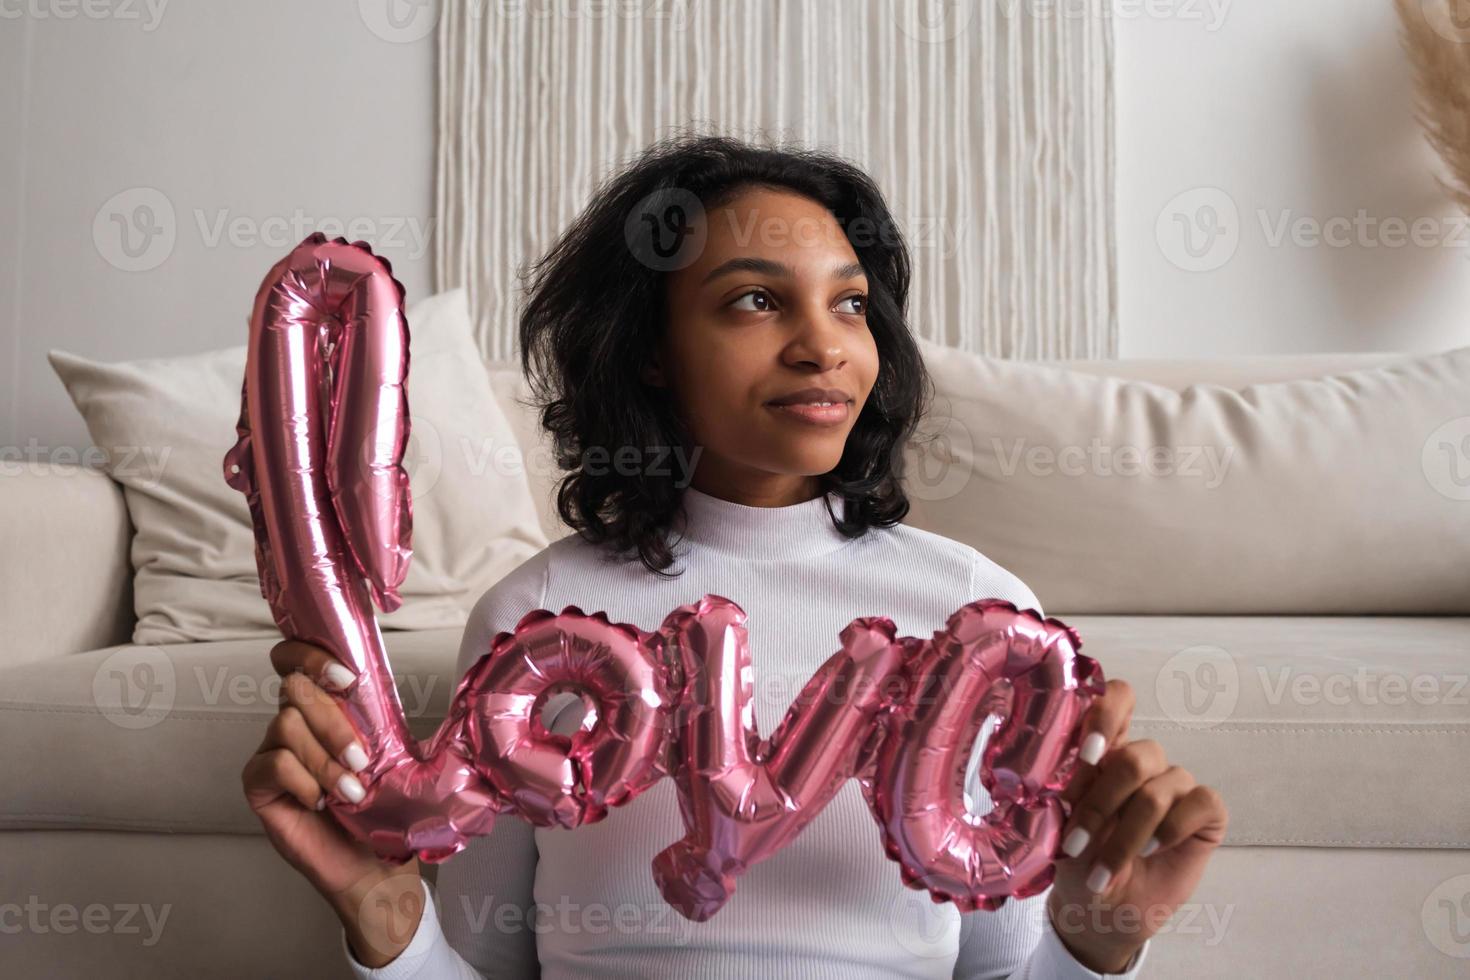 Valentines day portrait of african woman with love shaped balloon. 14 february concept photo